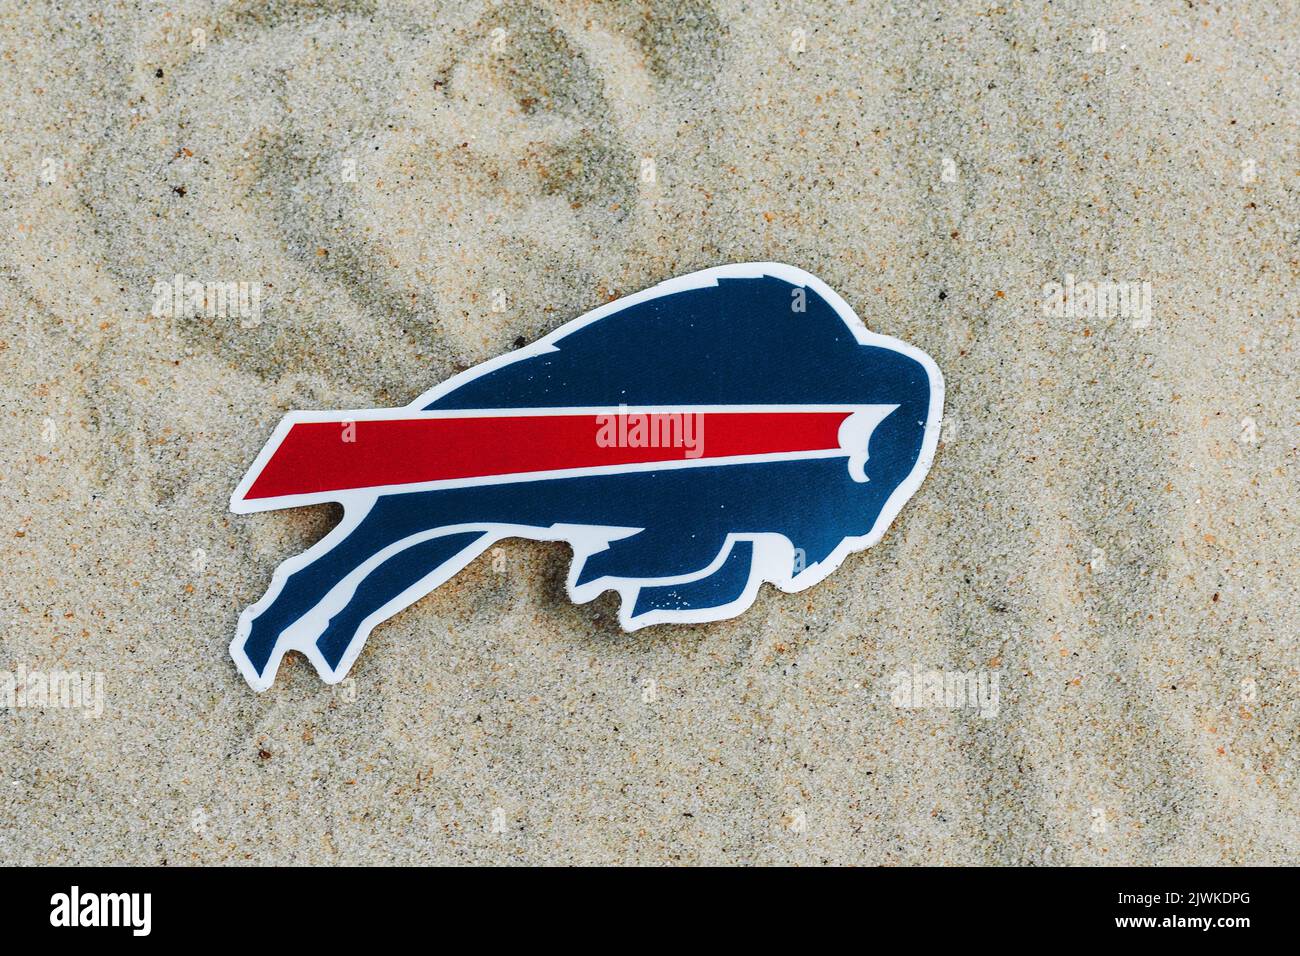 September 15, 2021, Moscow, Russia. The logo of the Buffalo Bills football club on the sand of the beach. Stock Photo